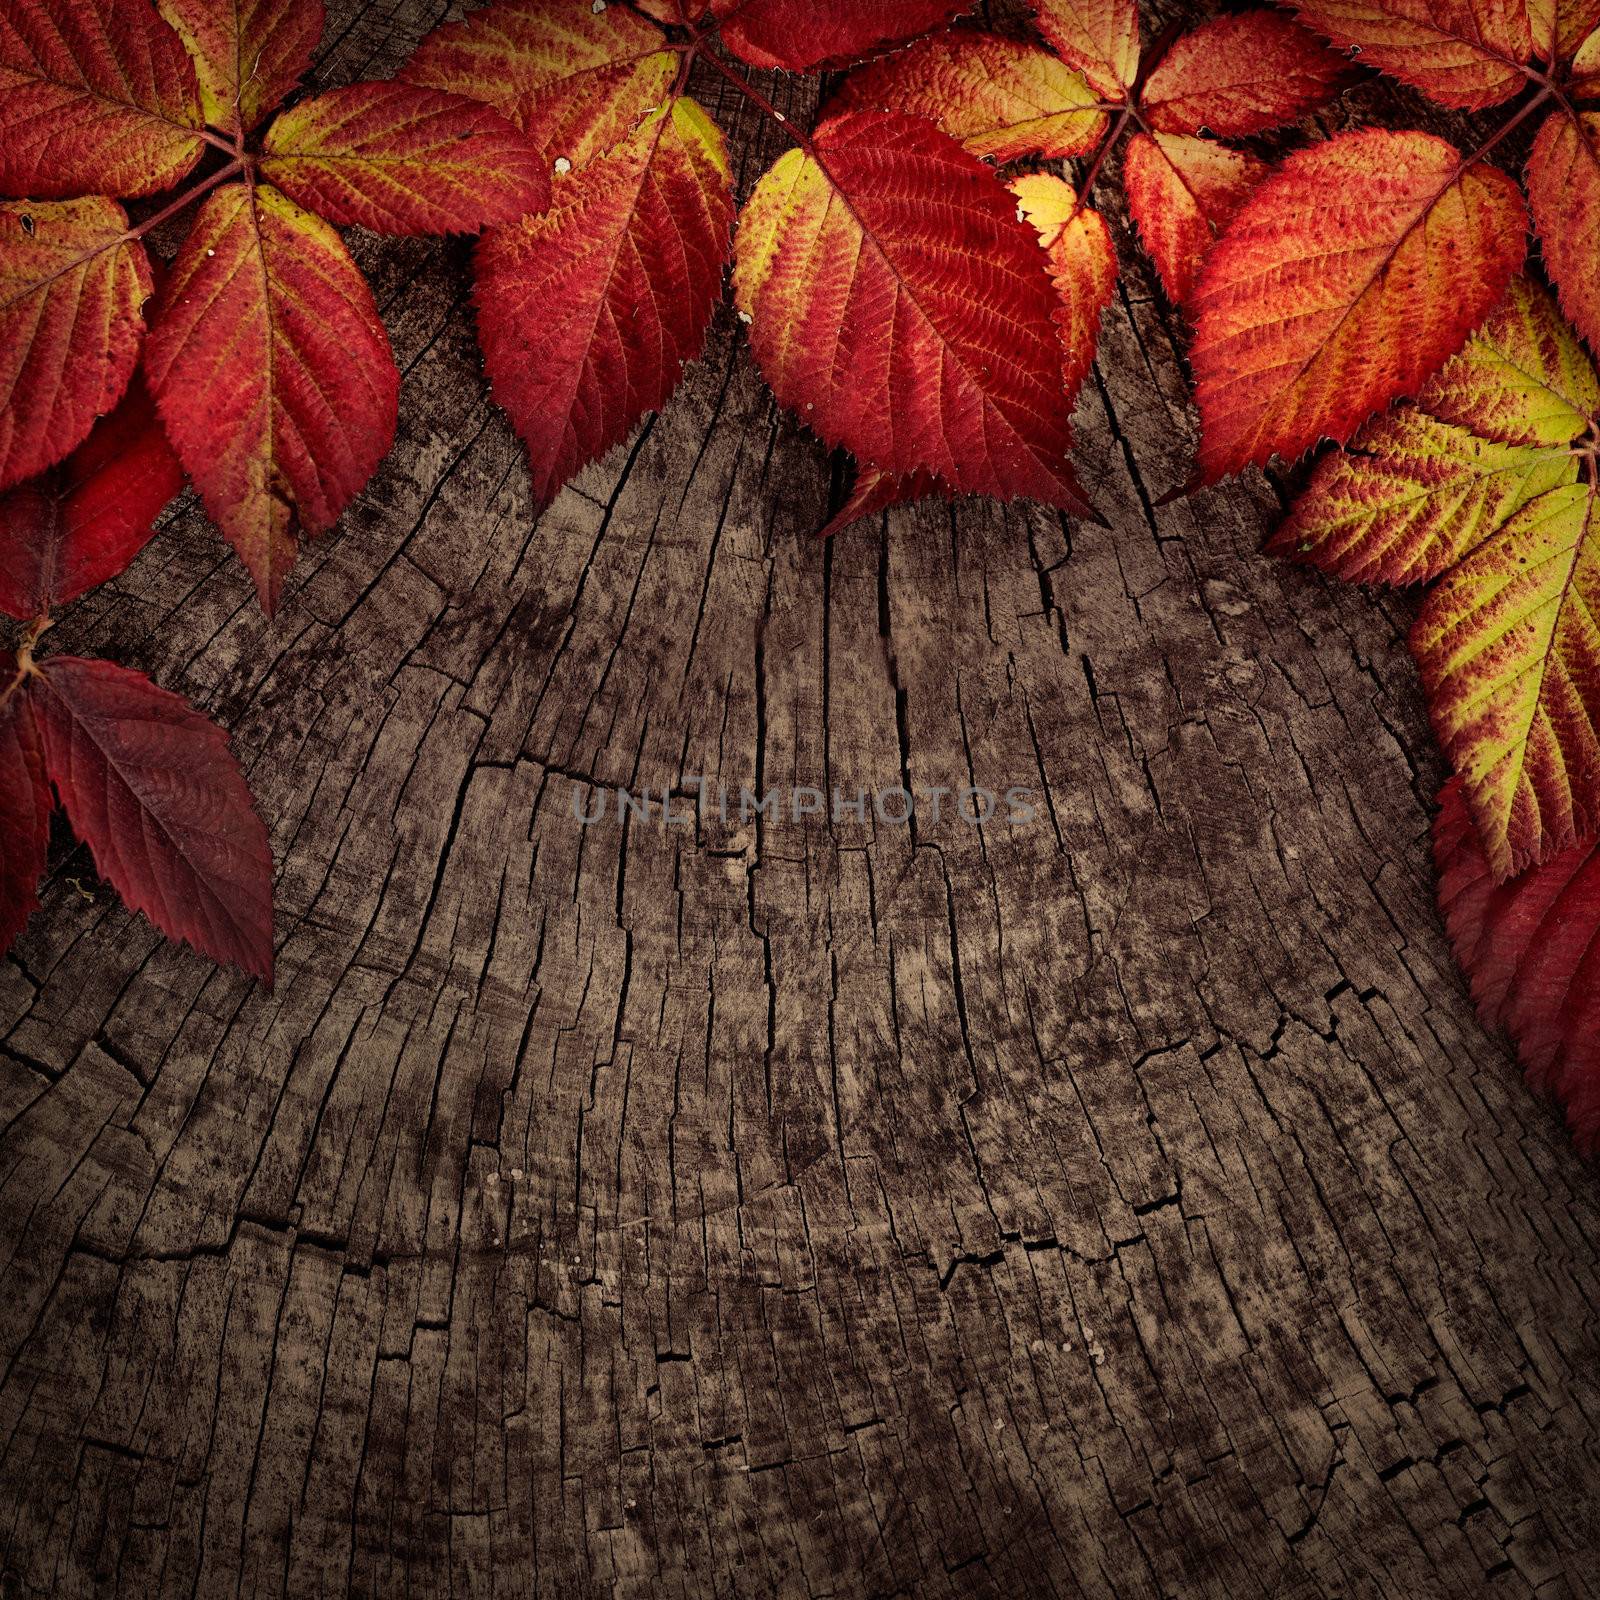 Autumn red leaves by mythja